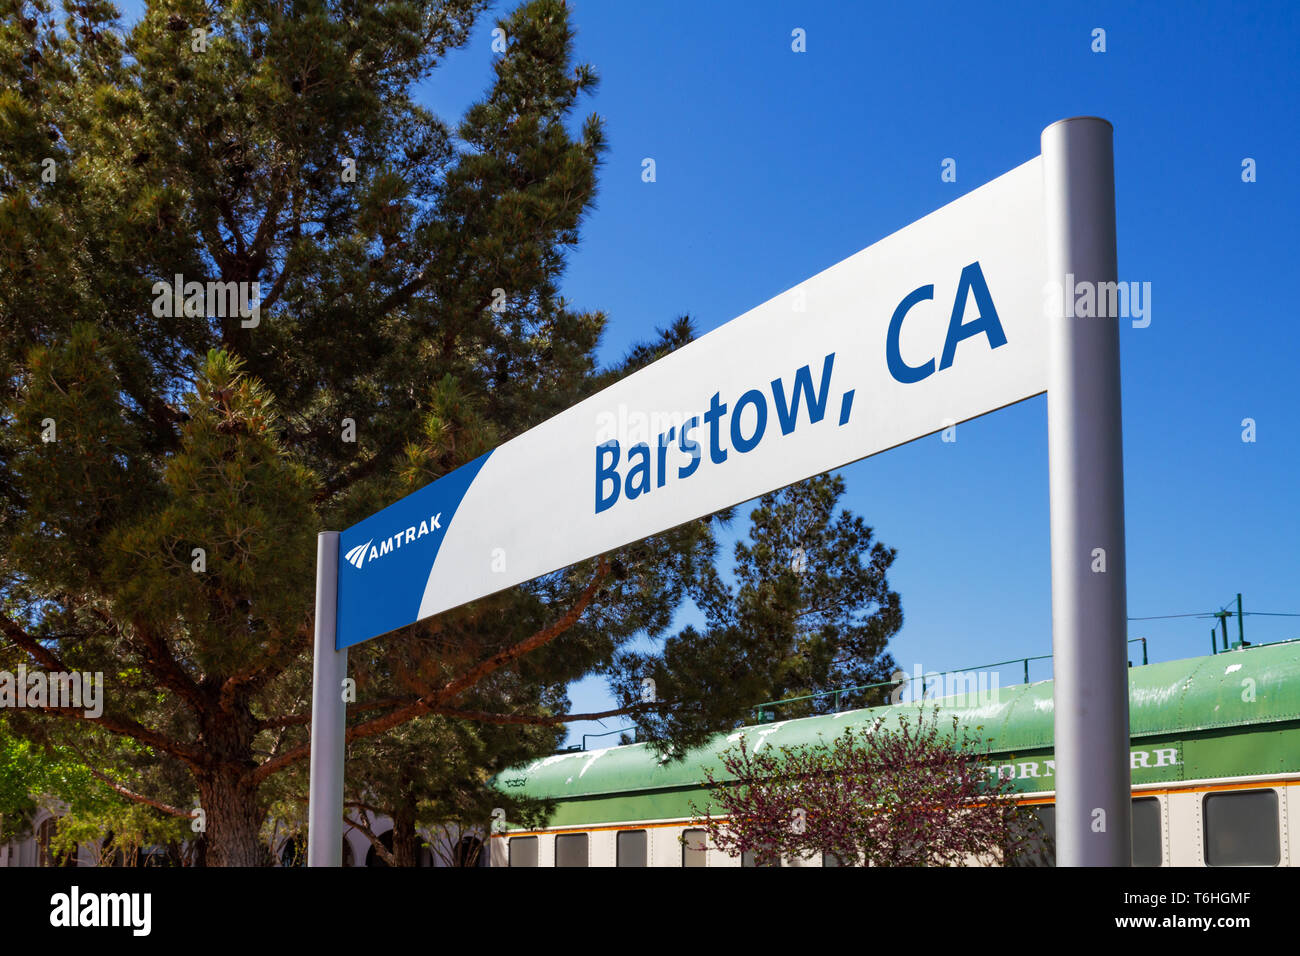 Barstow, CA / USA – April 14, 2019: Amtrak location sign at Barstow, California located at the famous Barstow Harvey House at 685 North 1st Ave. Stock Photo